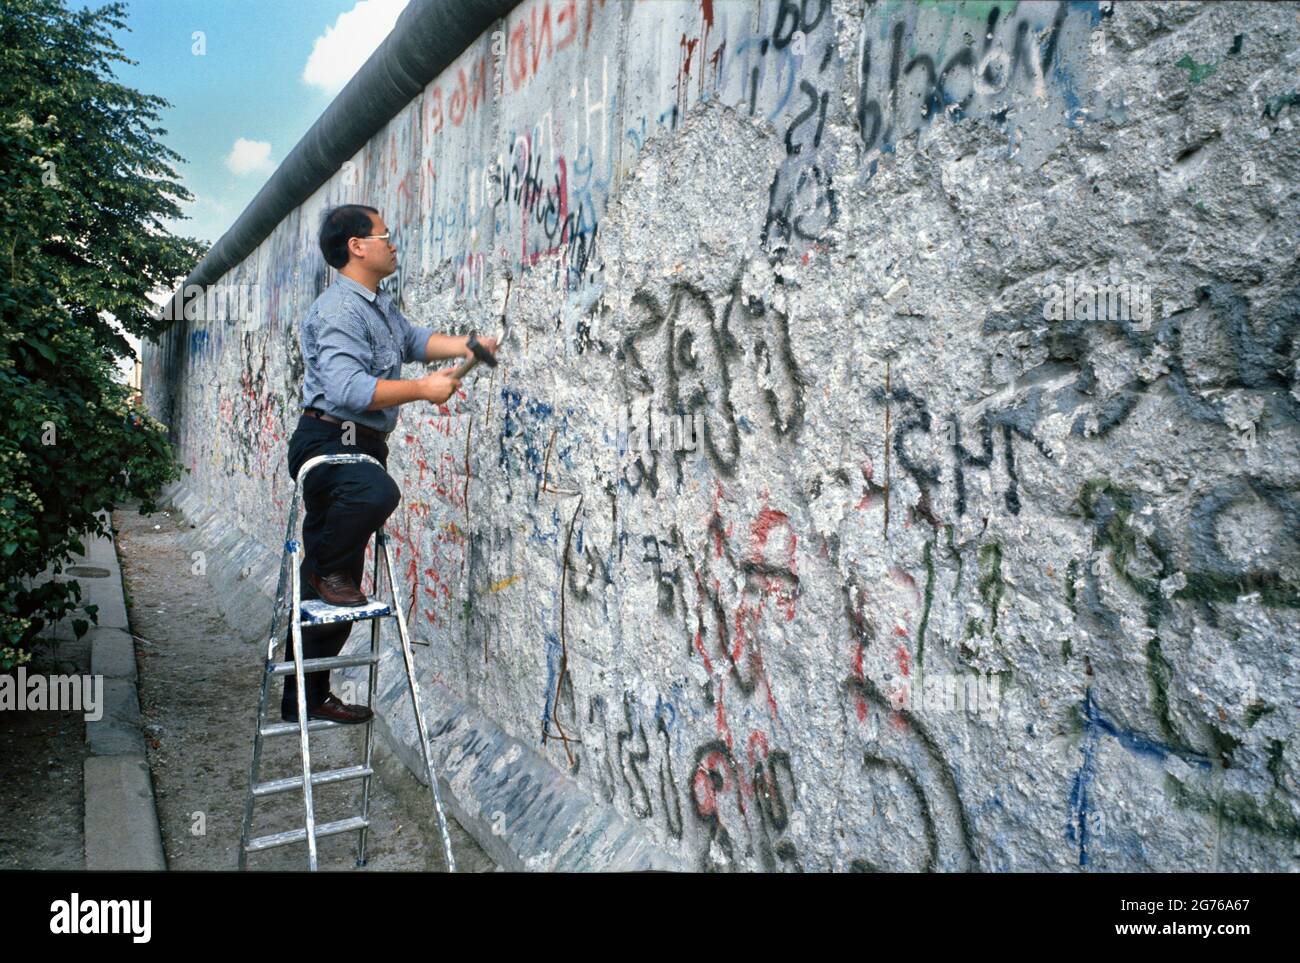 Berlin, Germany. 20 April 1990. Berlin Wall souvenir hunters known as Wallpeckers, chip away at a section of the Berlin Wall April 20, 1990 in West Berlin, West Germany. The wall separating East and West Germany came down November 9, 1989. Stock Photo